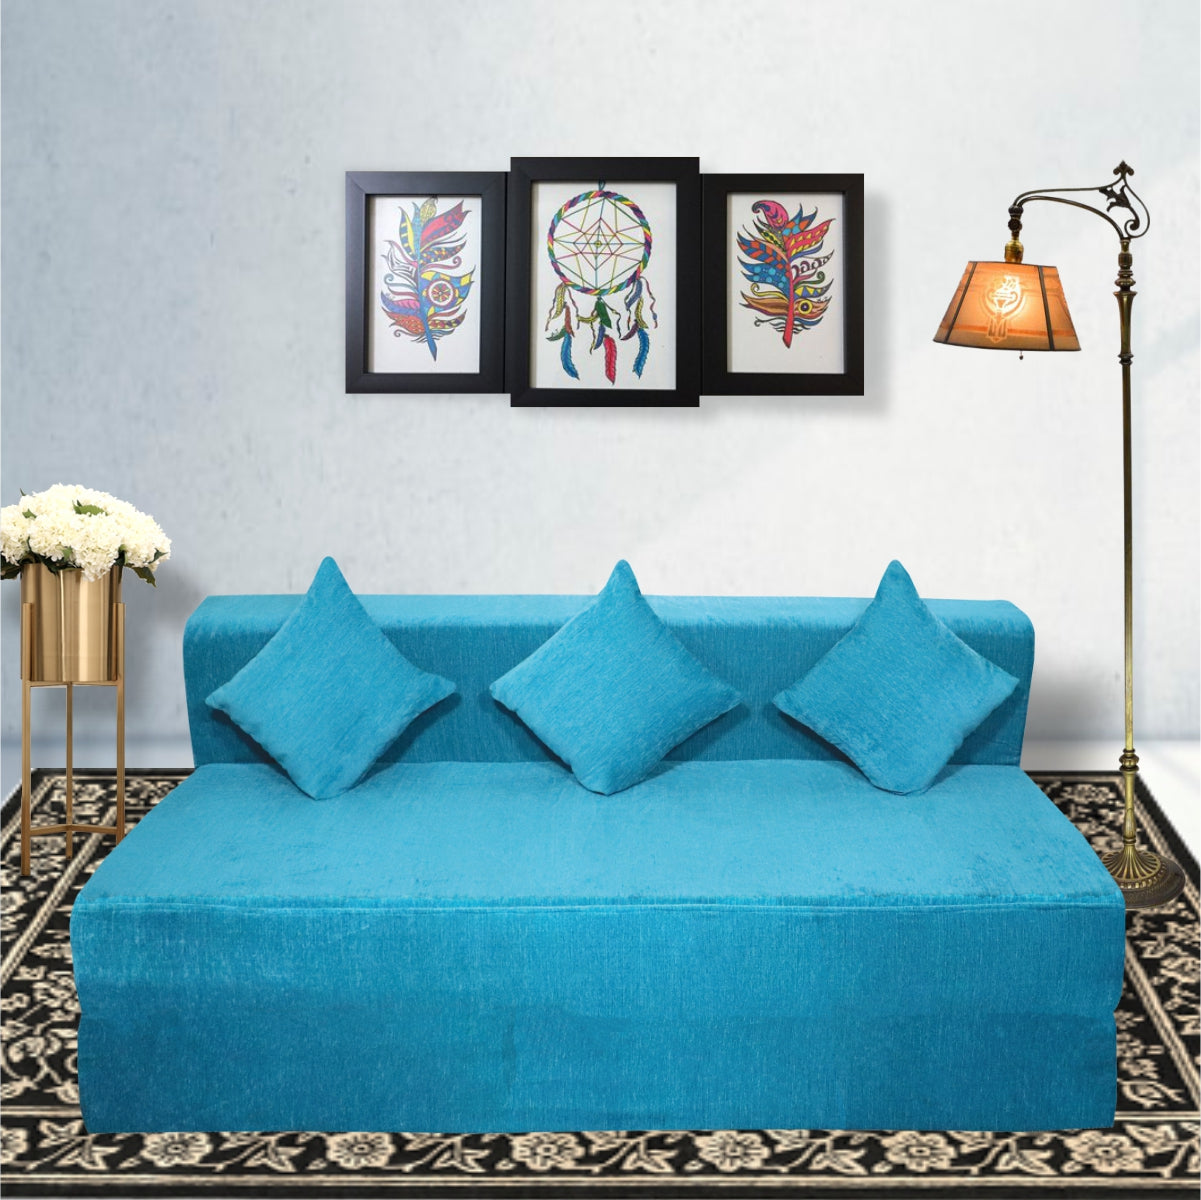 Seventh Heaven Sky Blue Morphino Fabric 6×6 Sofa cum Bed with 3 Cushion